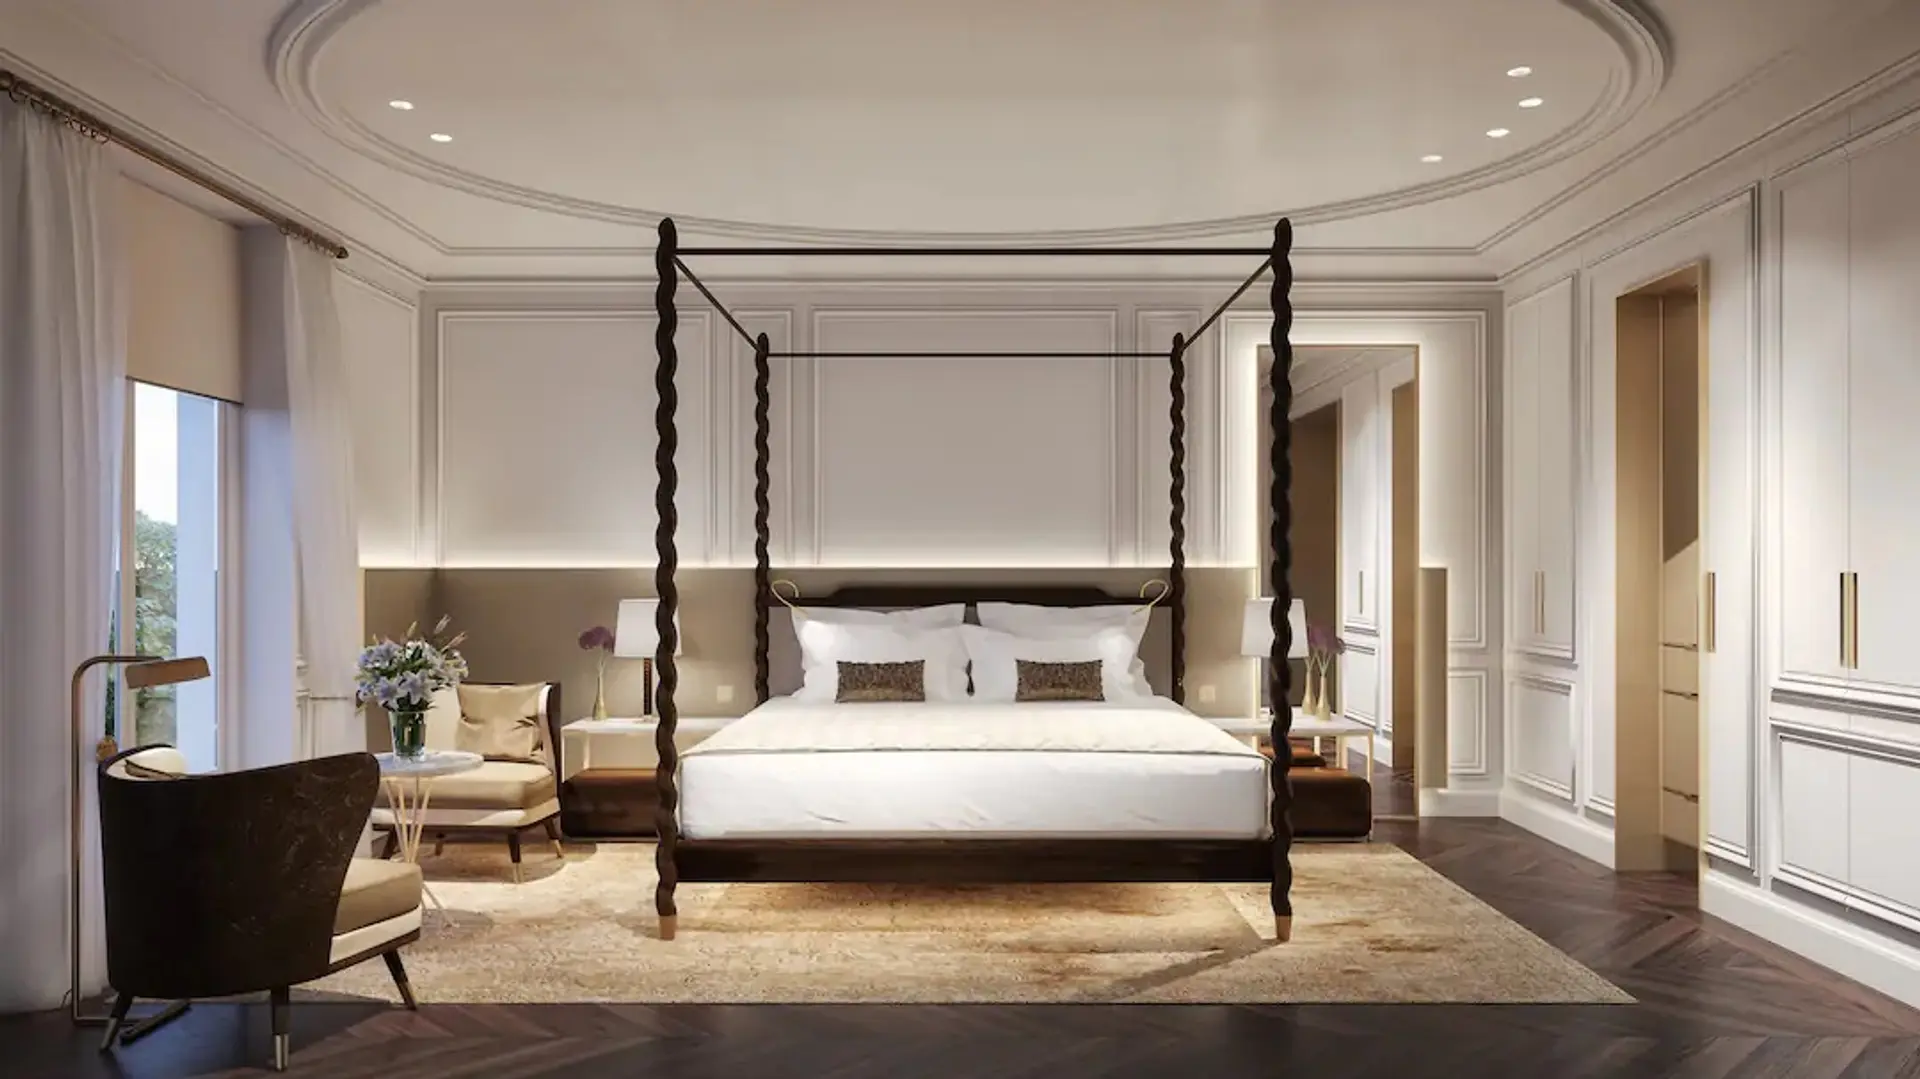 Hotels Articles - The Mandarin Oriental Ritz, Madrid debuts in the Spanish capital